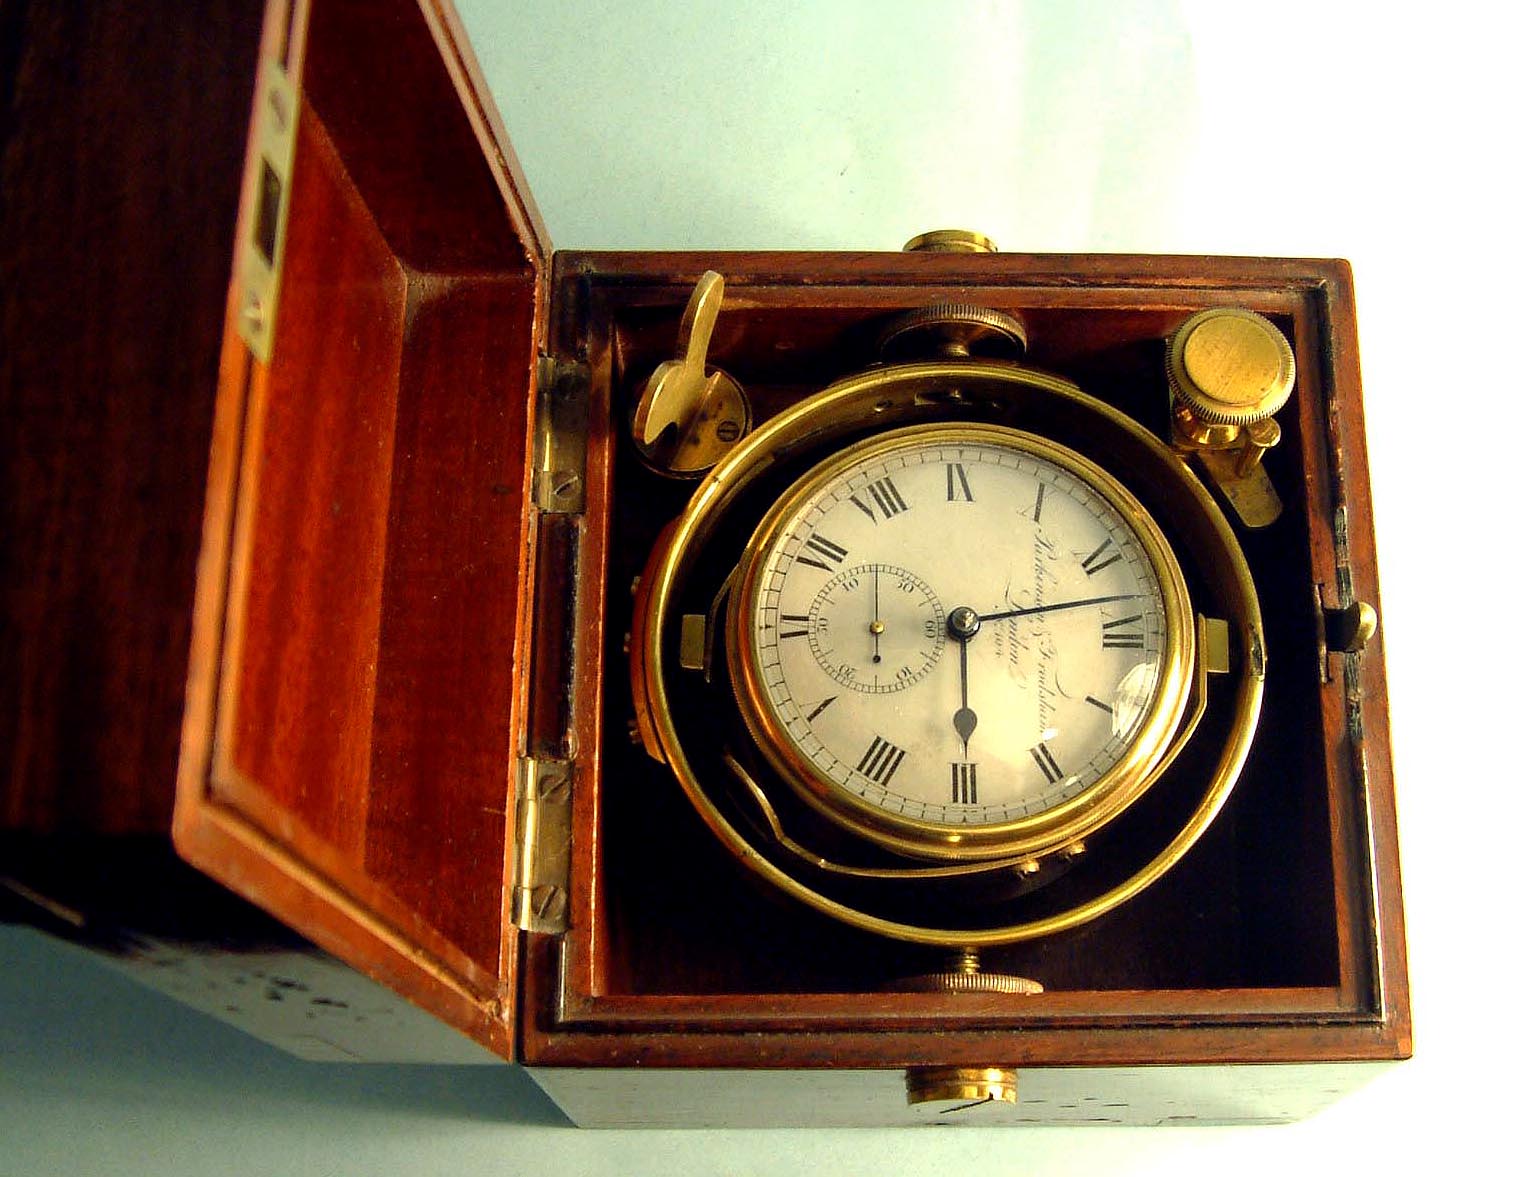 chronometer - définition - What is